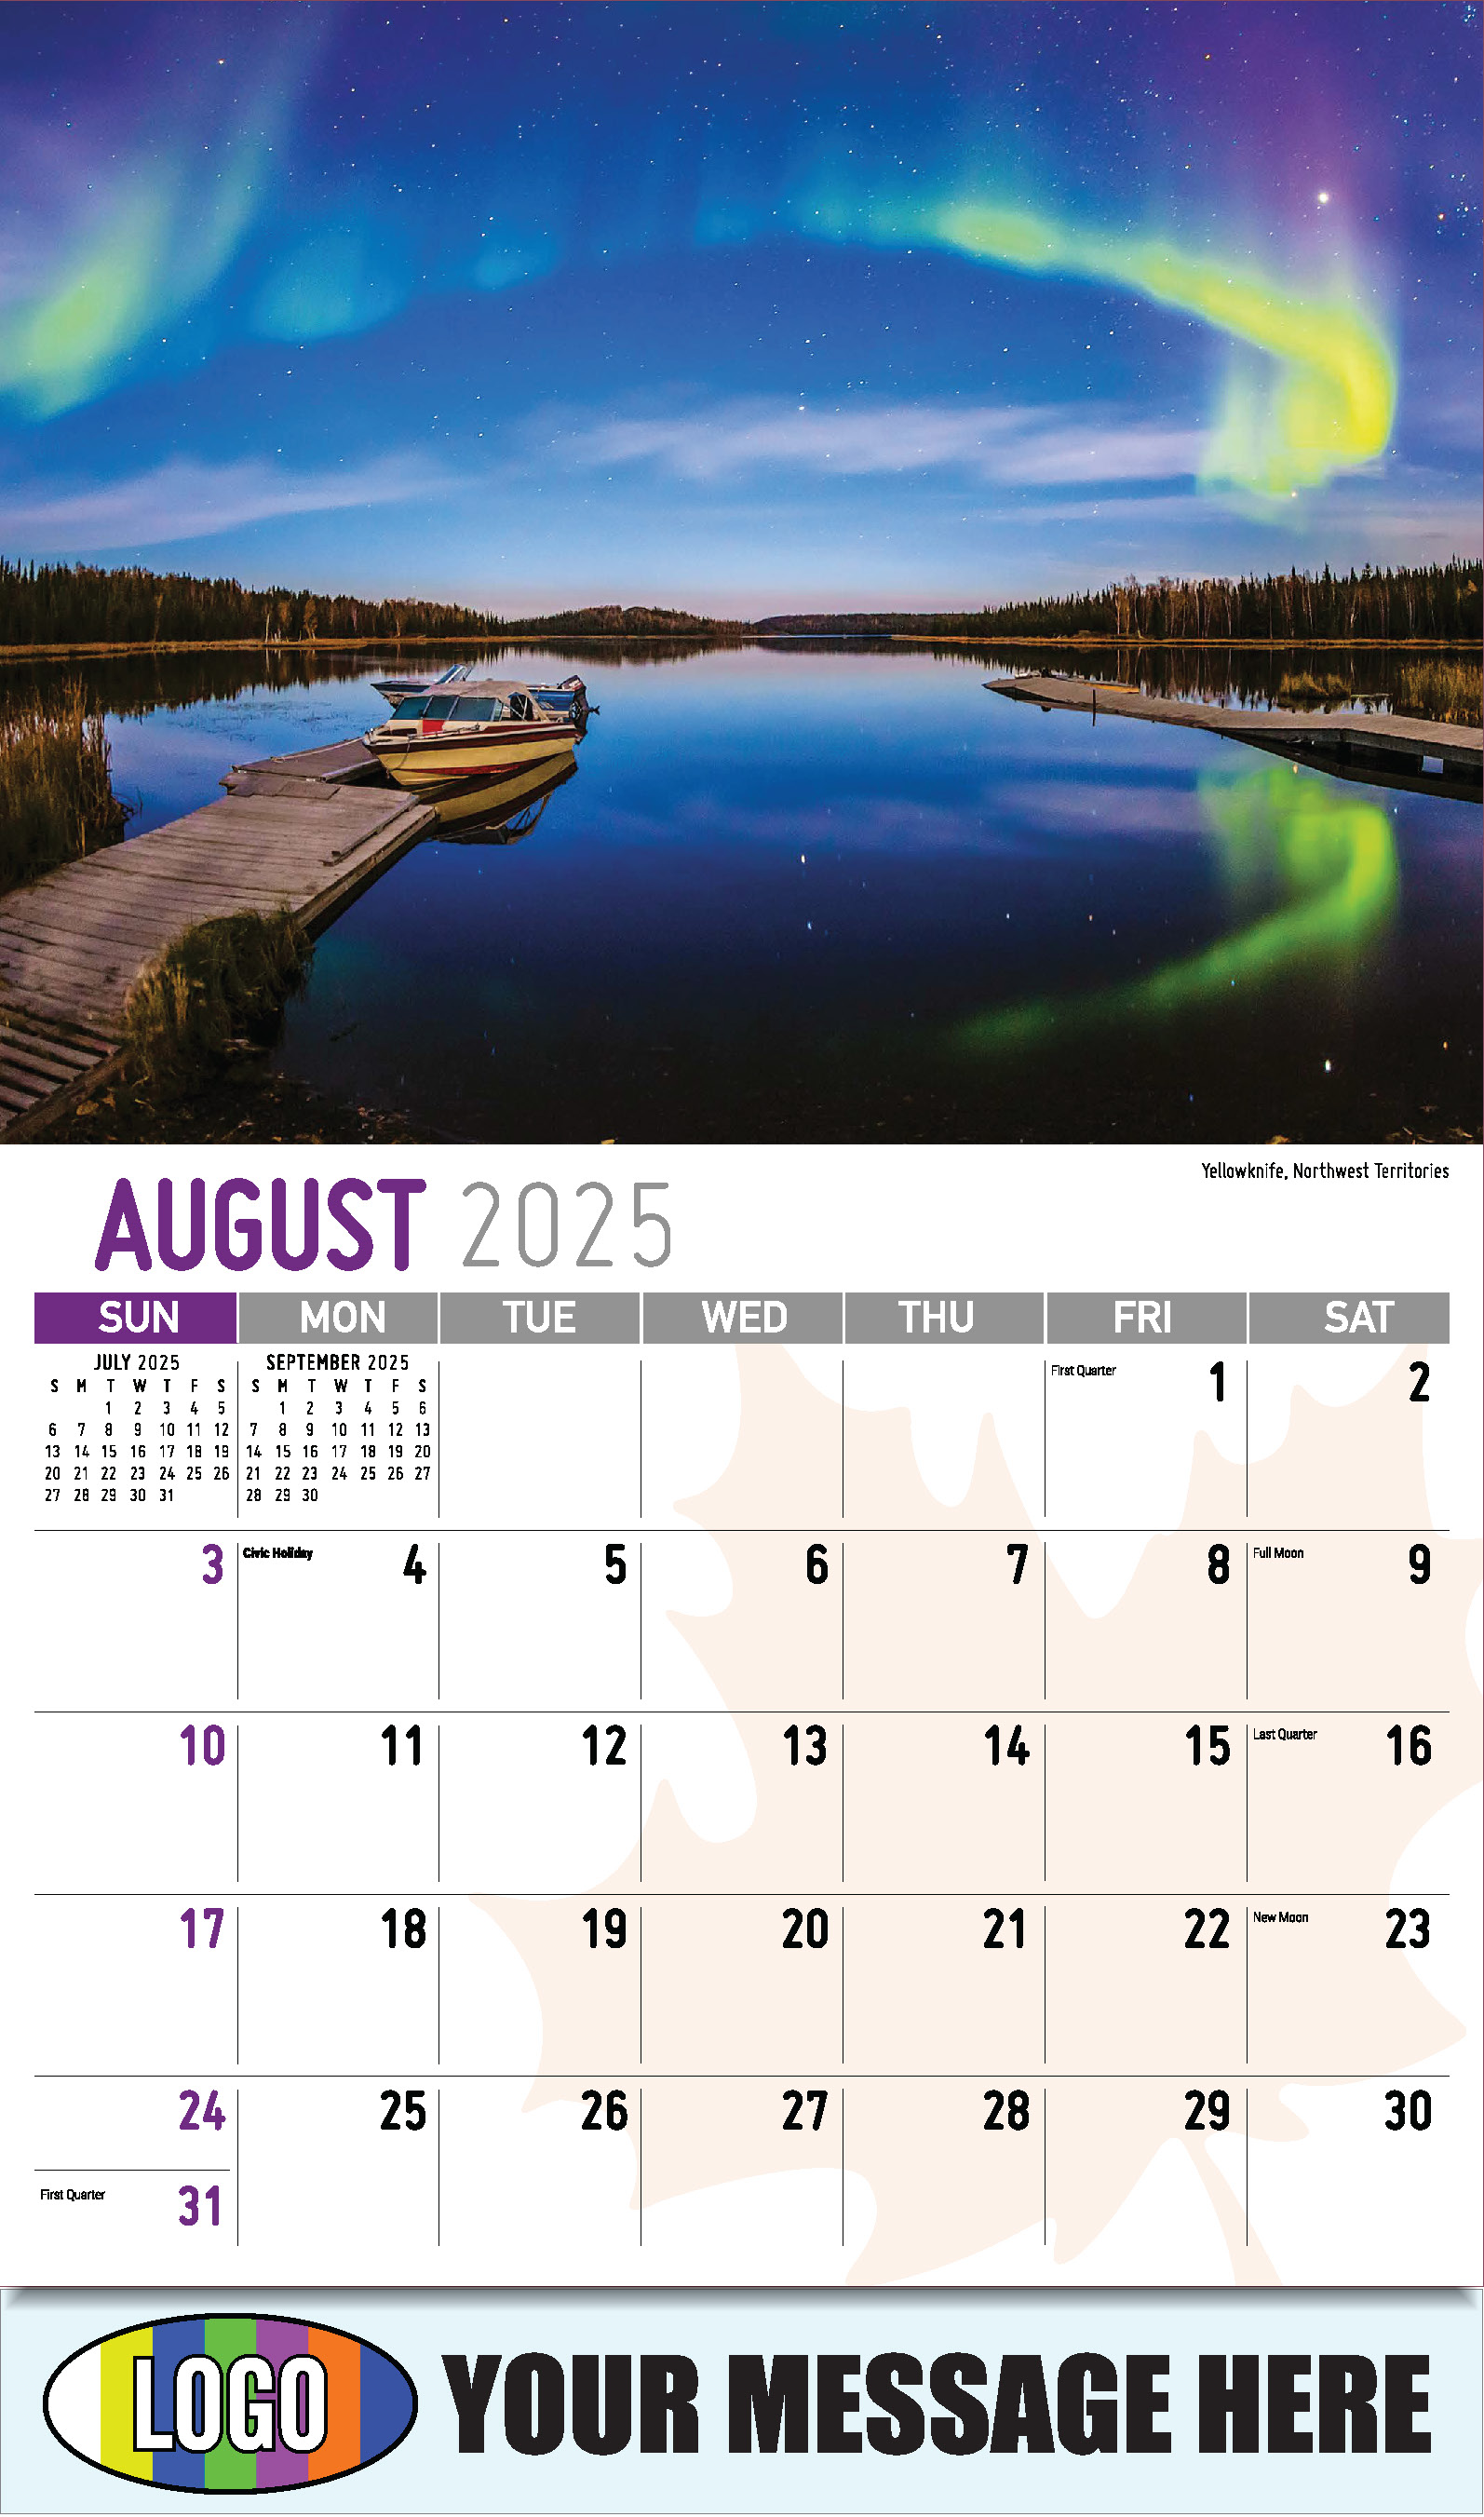 Scenes of Canada 2025 Business Promotion Wall Calendar - August